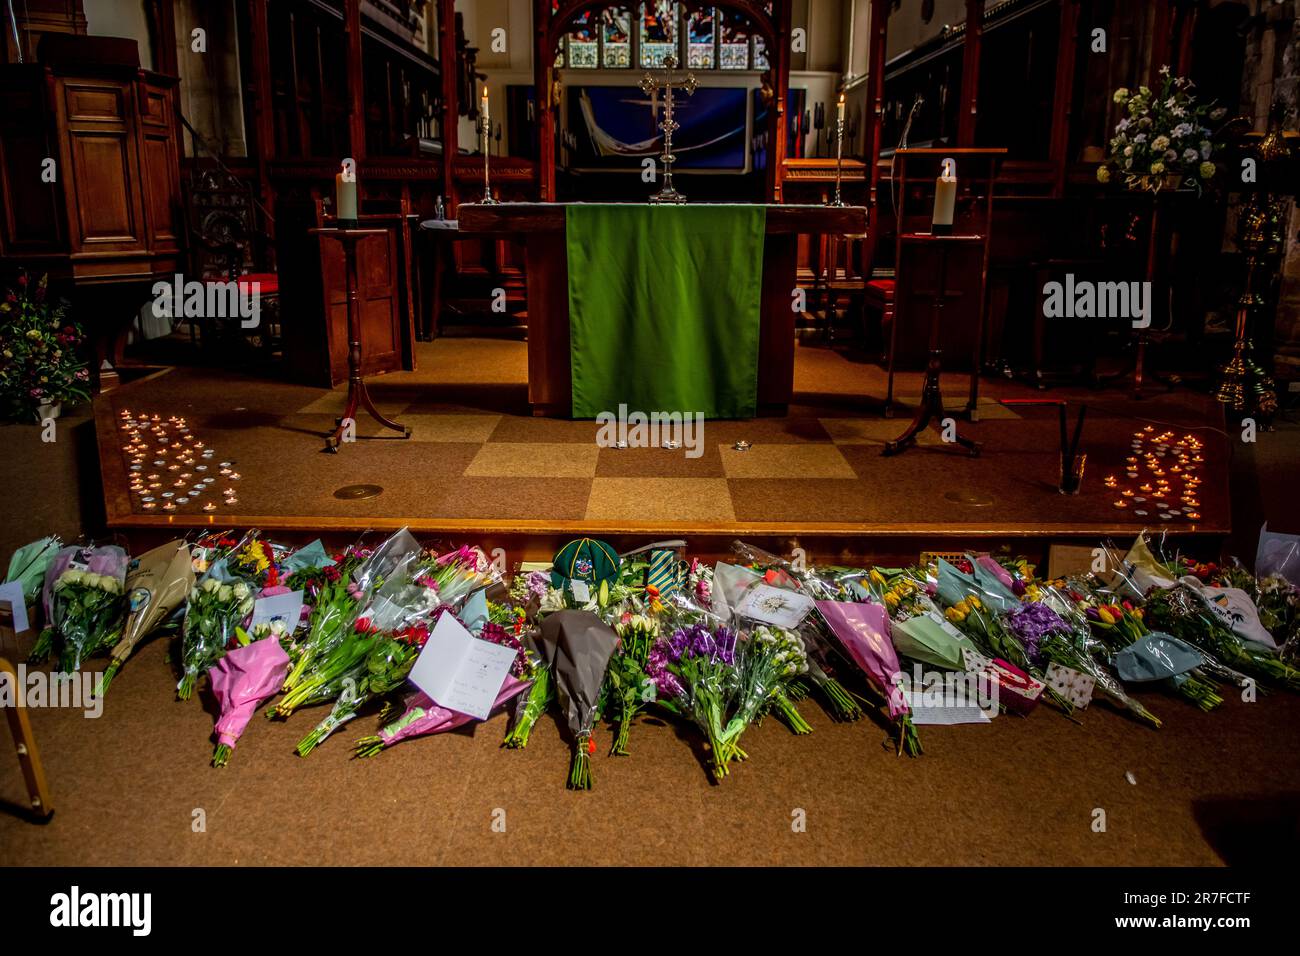 Nottingham, UK. 14th June, 2023. Nottingham attacks: Flowers and tributes left in St Peter's church In Nottingham city centre today after yesterdays attacks which left 3 people dead and 3 injured. Nottingham City, Nottingham, United Kingdom, 14th June 2023 (Photo by Lisa Harding/News Images) in Nottingham, United Kingdom on 6/14/2023. (Photo by Lisa Harding/News Images/Sipa USA) Credit: Sipa USA/Alamy Live News Stock Photo